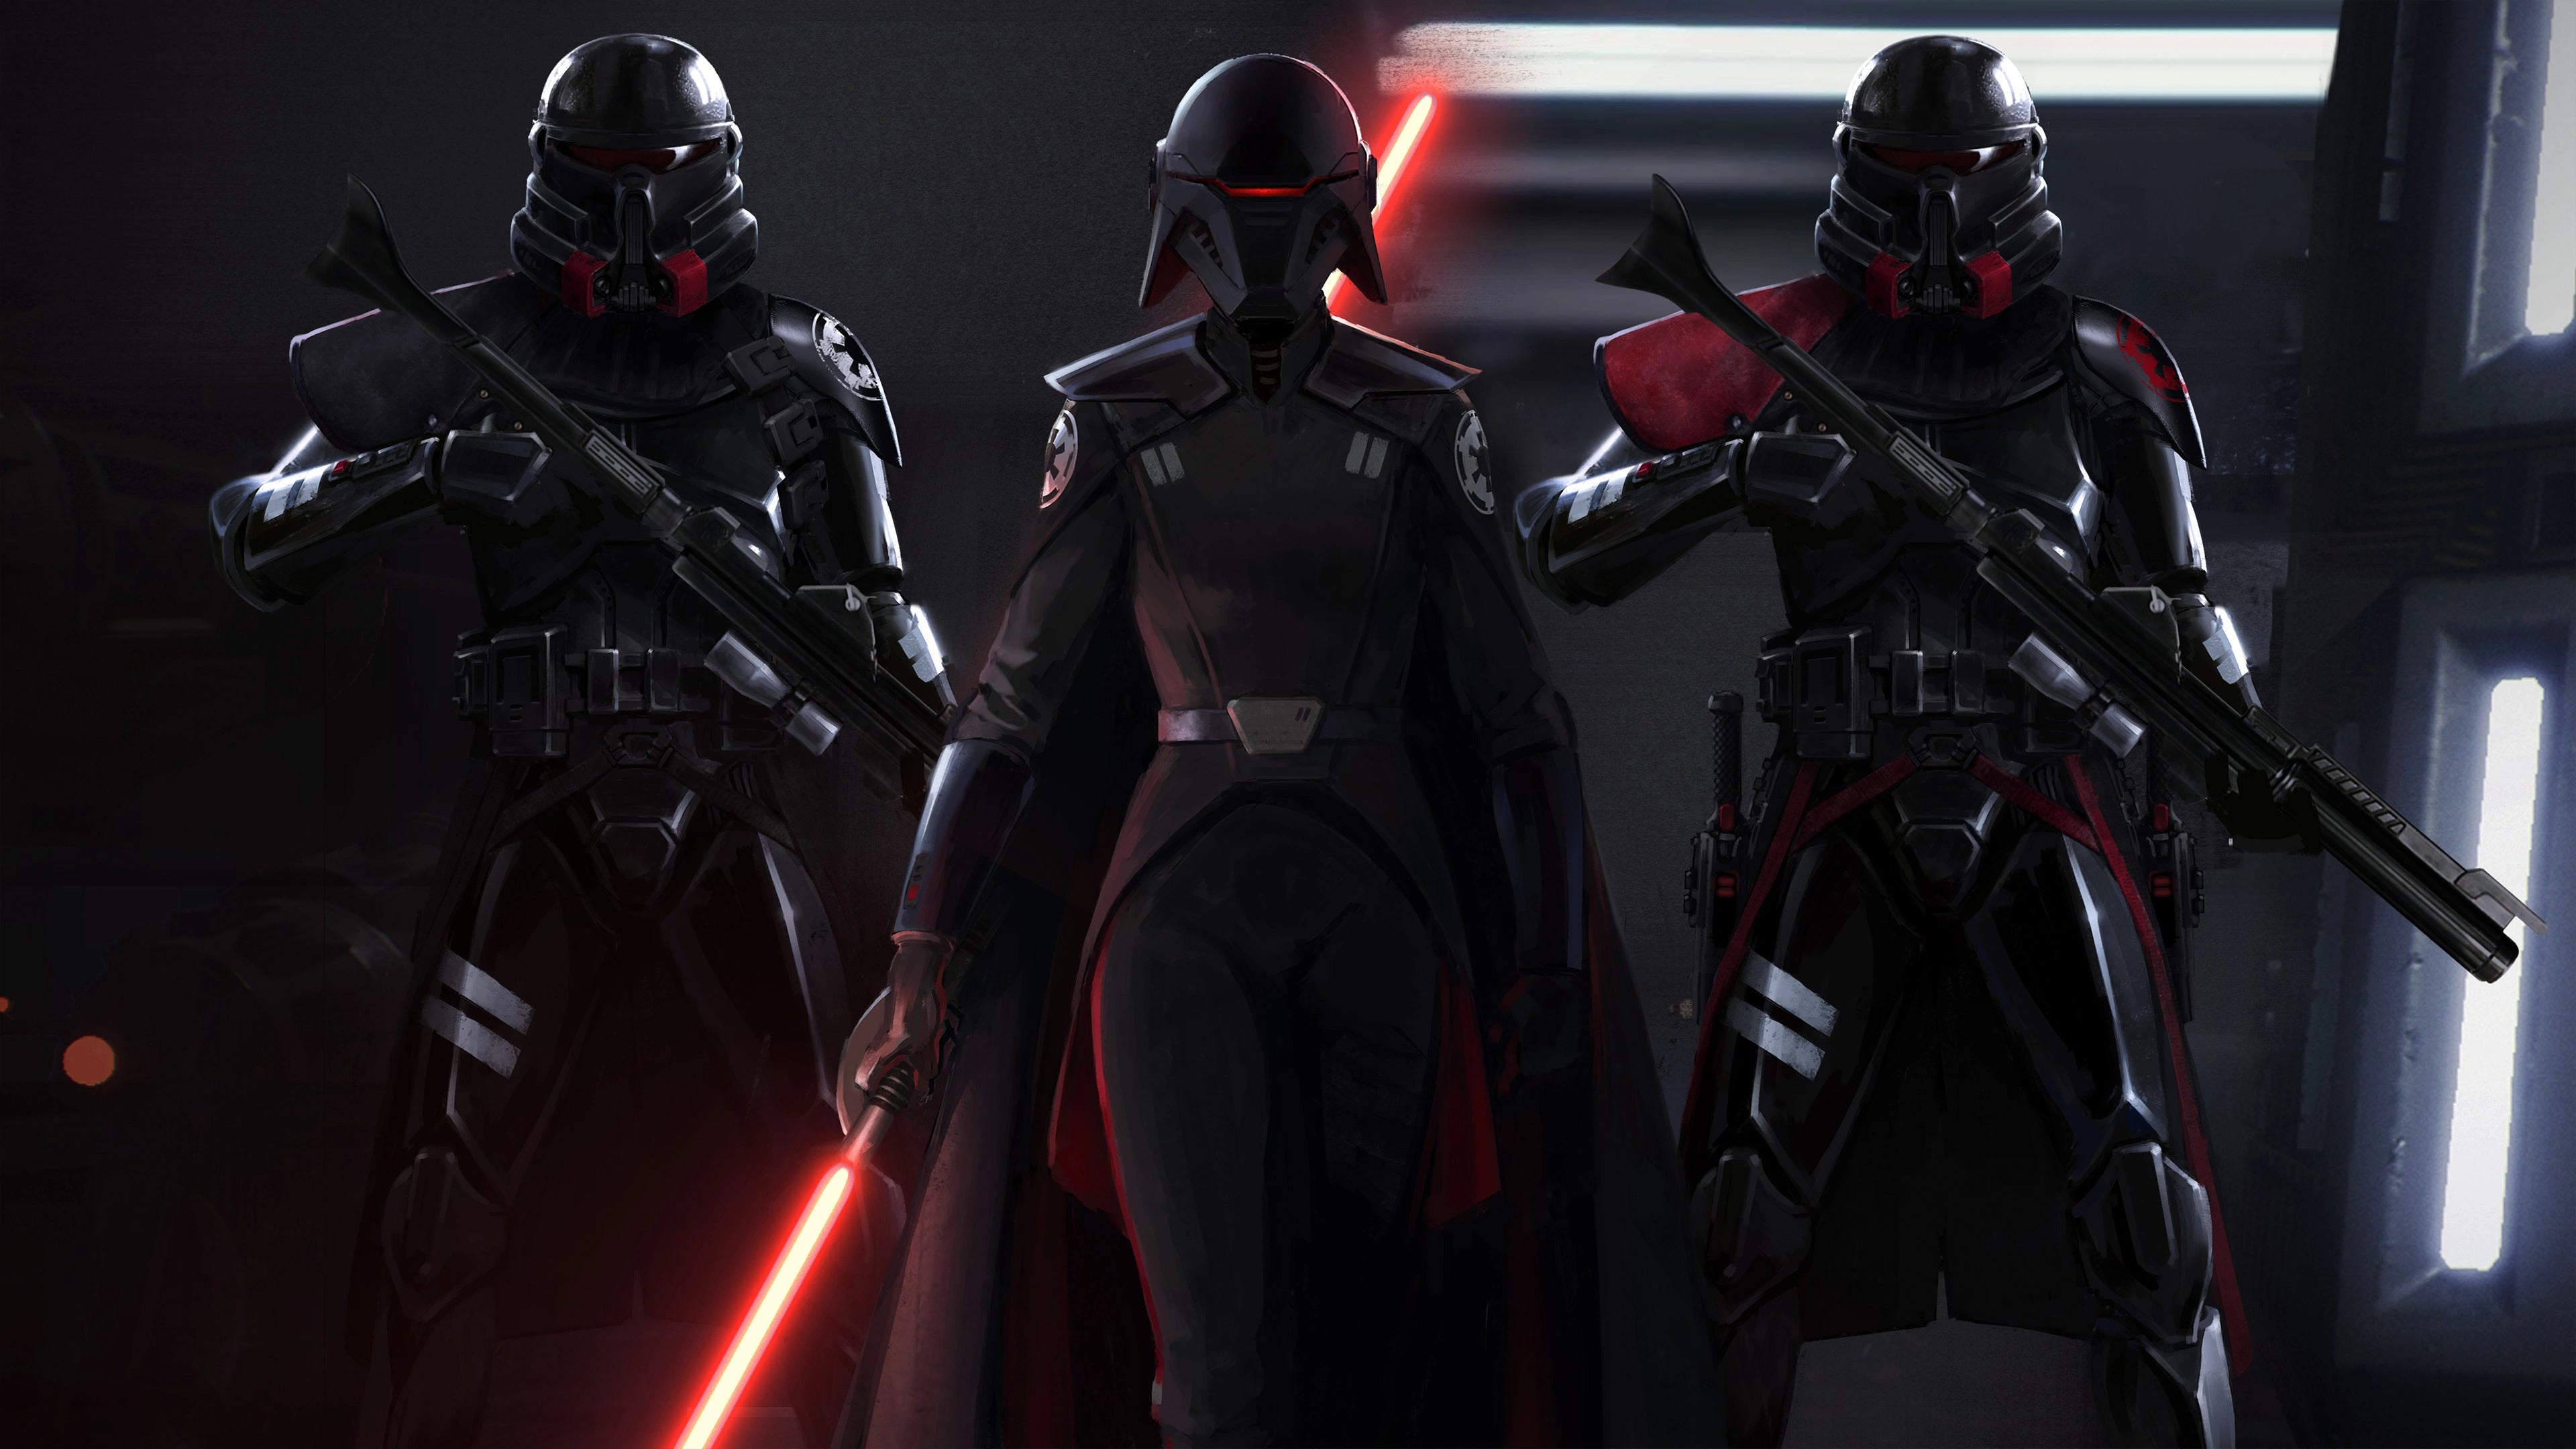 Inquisitors of the Star Wars Universe. Courtesy Lucasfilm.